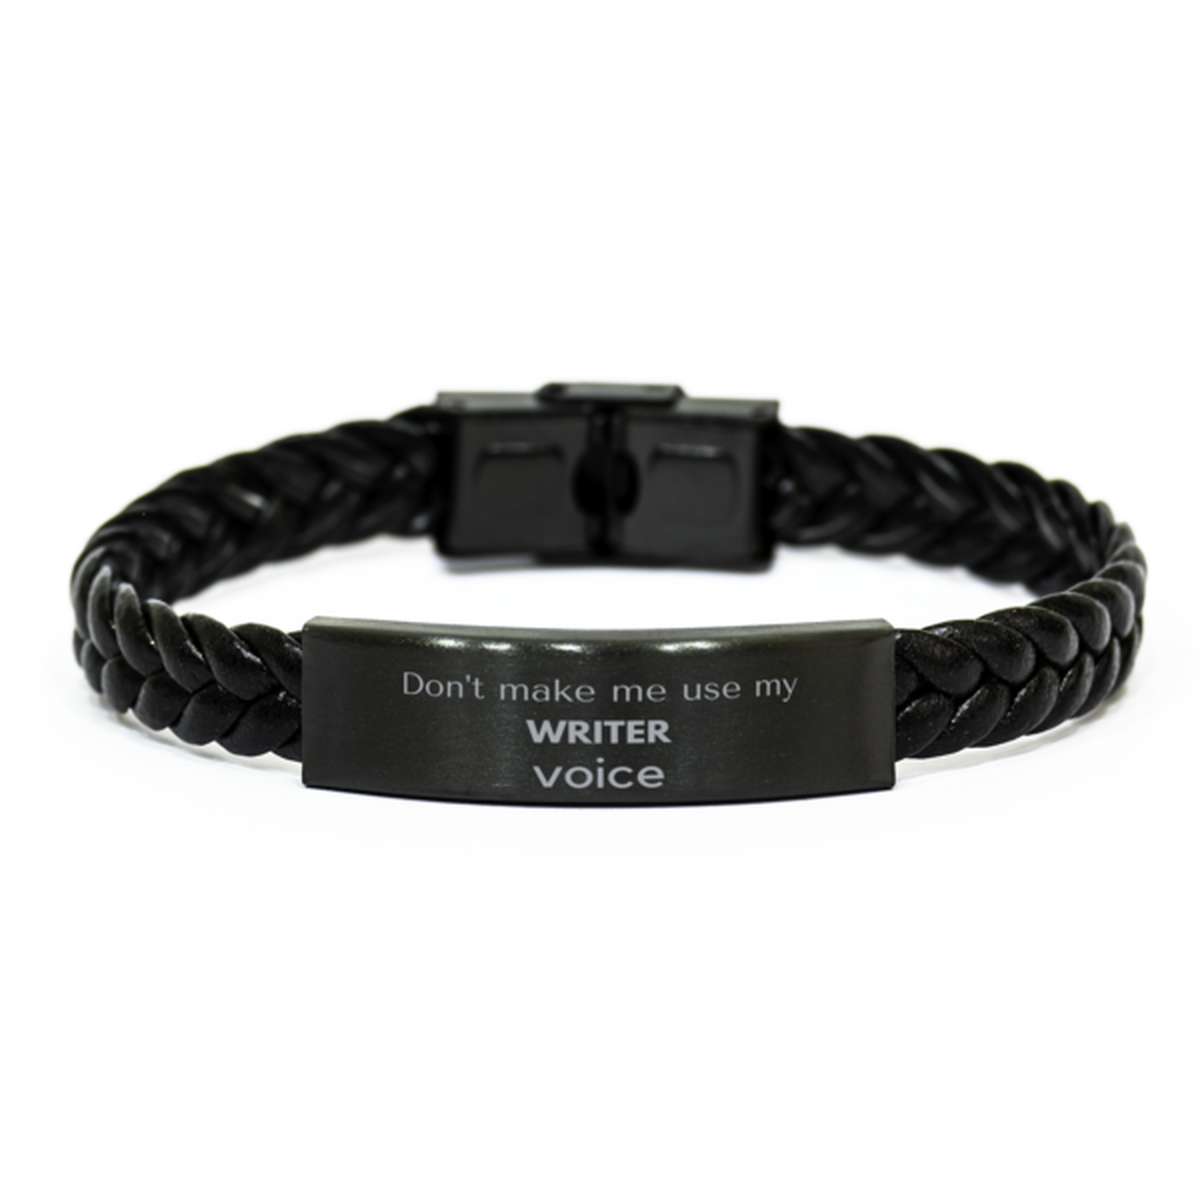 Don't make me use my Writer voice, Sarcasm Writer Gifts, Christmas Writer Braided Leather Bracelet Birthday Unique Gifts For Writer Coworkers, Men, Women, Colleague, Friends